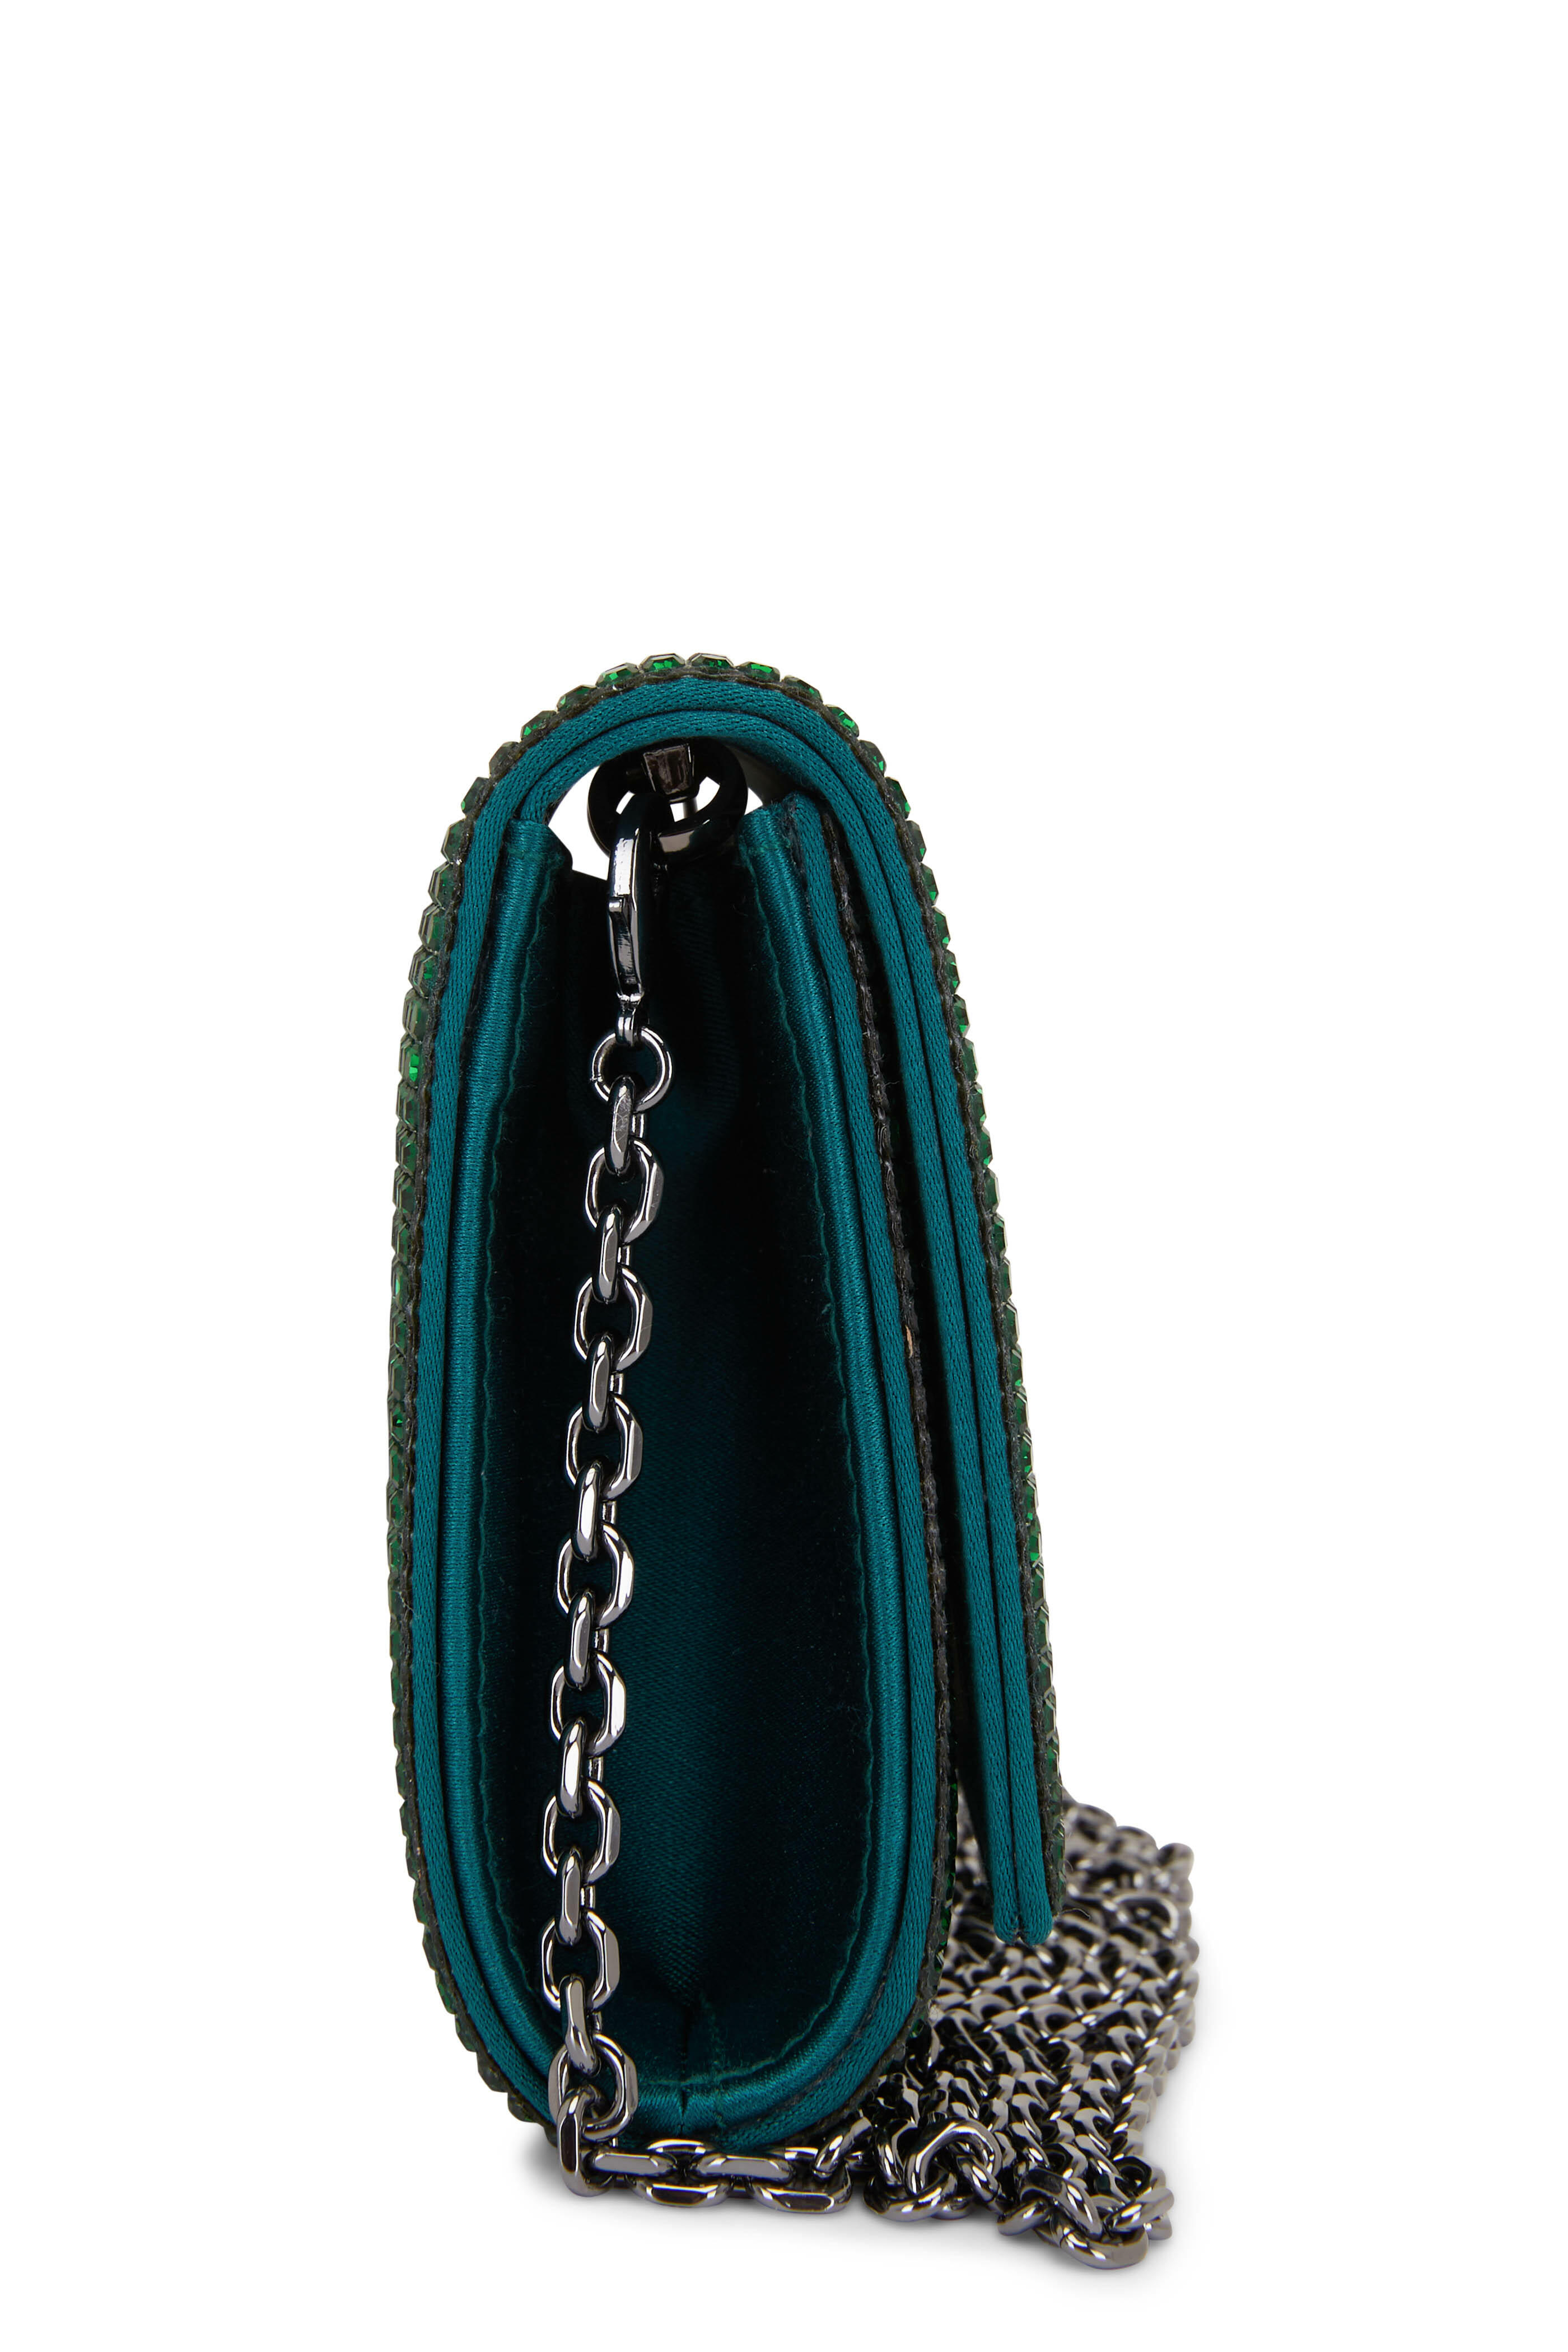 Judith Leiber Couture Beaded Envelope Clutch Emerald